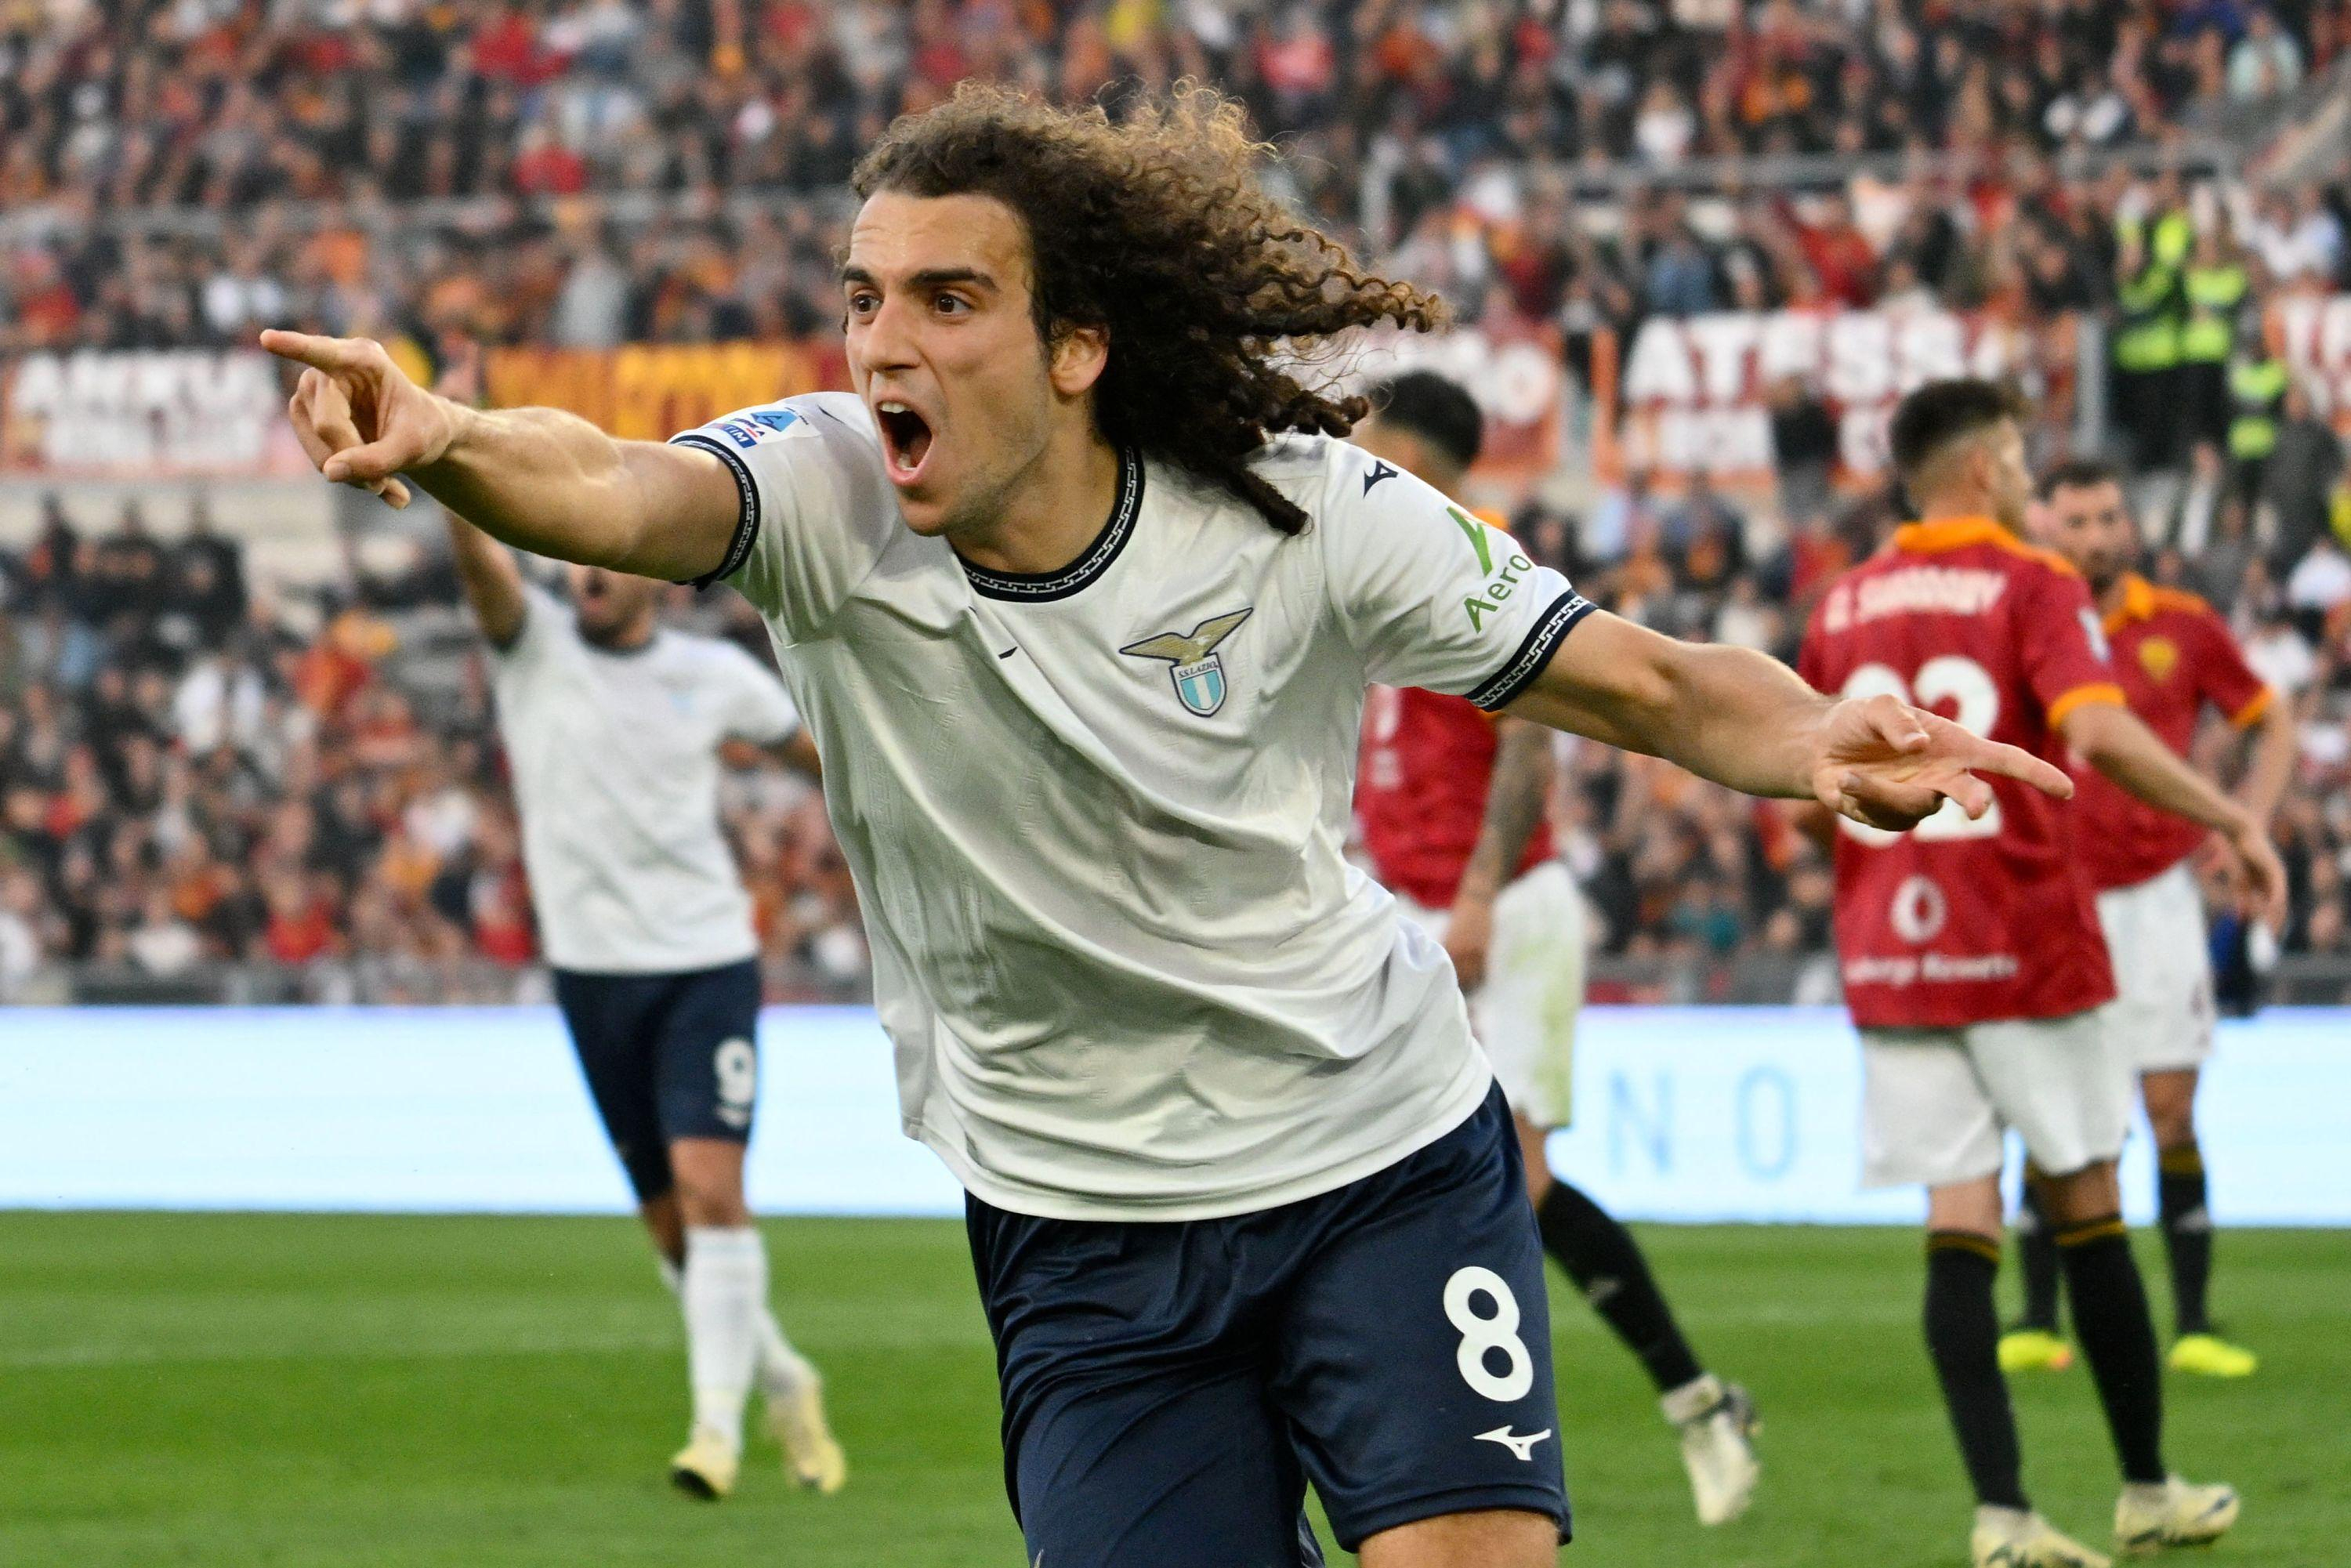 Football: Guendouzi summoned by Tudor for the second leg of the Italian Cup semi-final